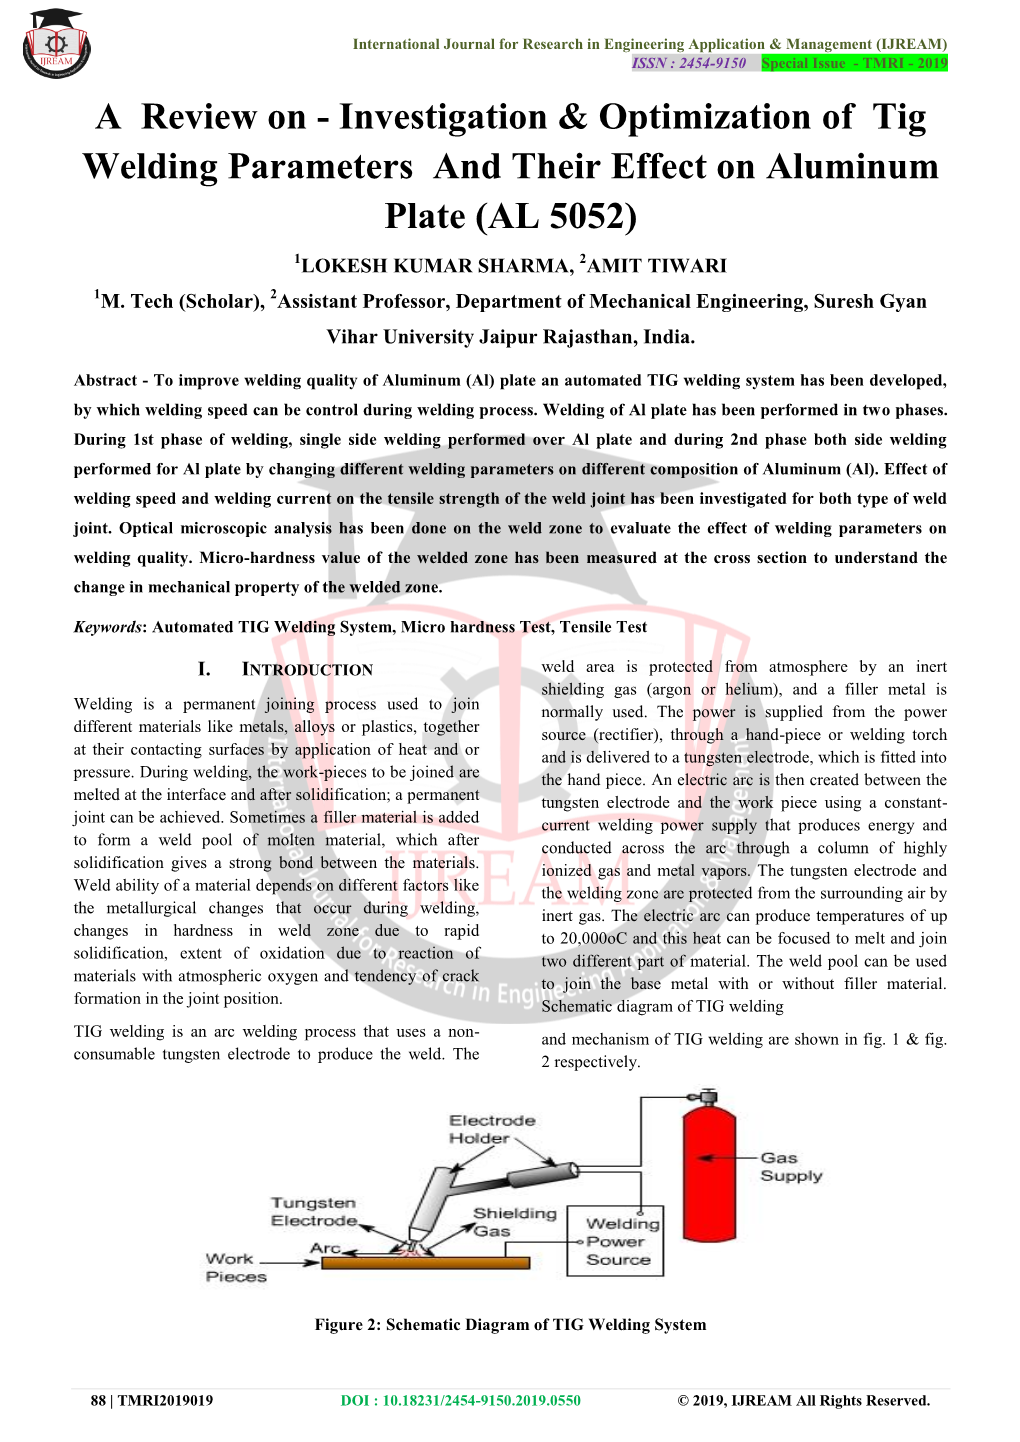 Investigation & Optimization of Tig Welding Parameters And